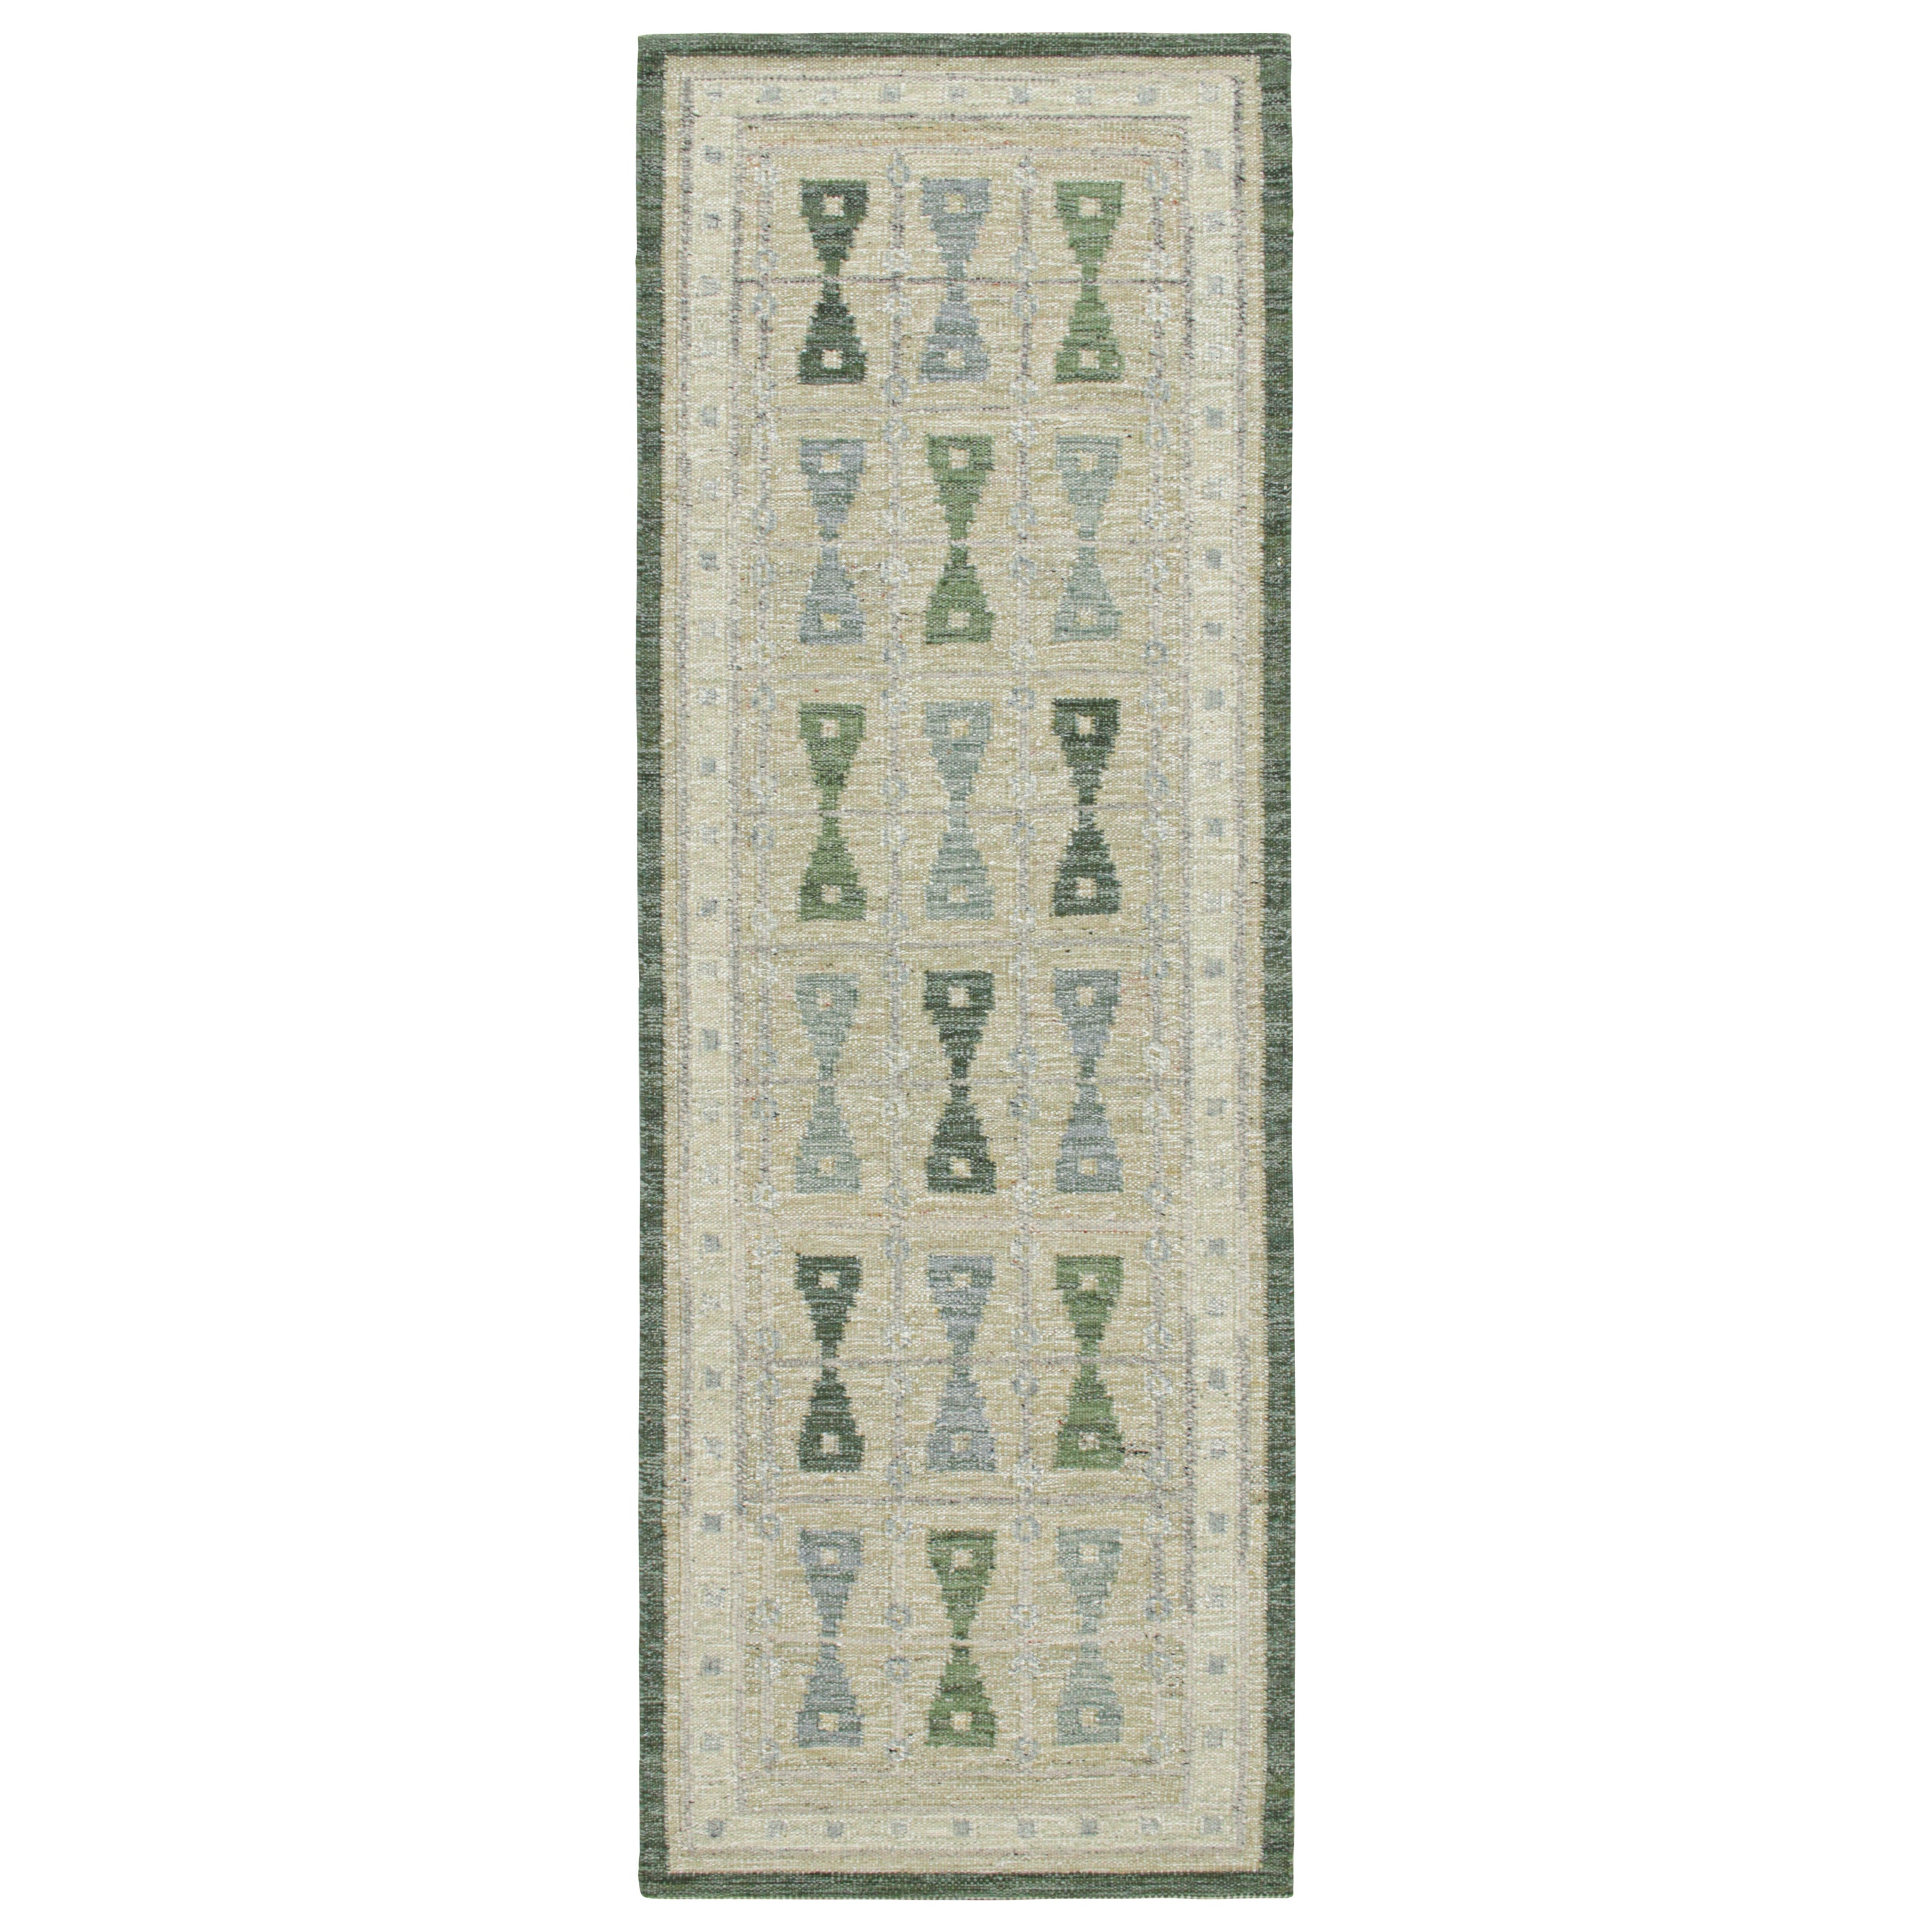 Rug & Kilim’s Scandinavian Style Kilim Runner in Beige with Geometric Patterns For Sale